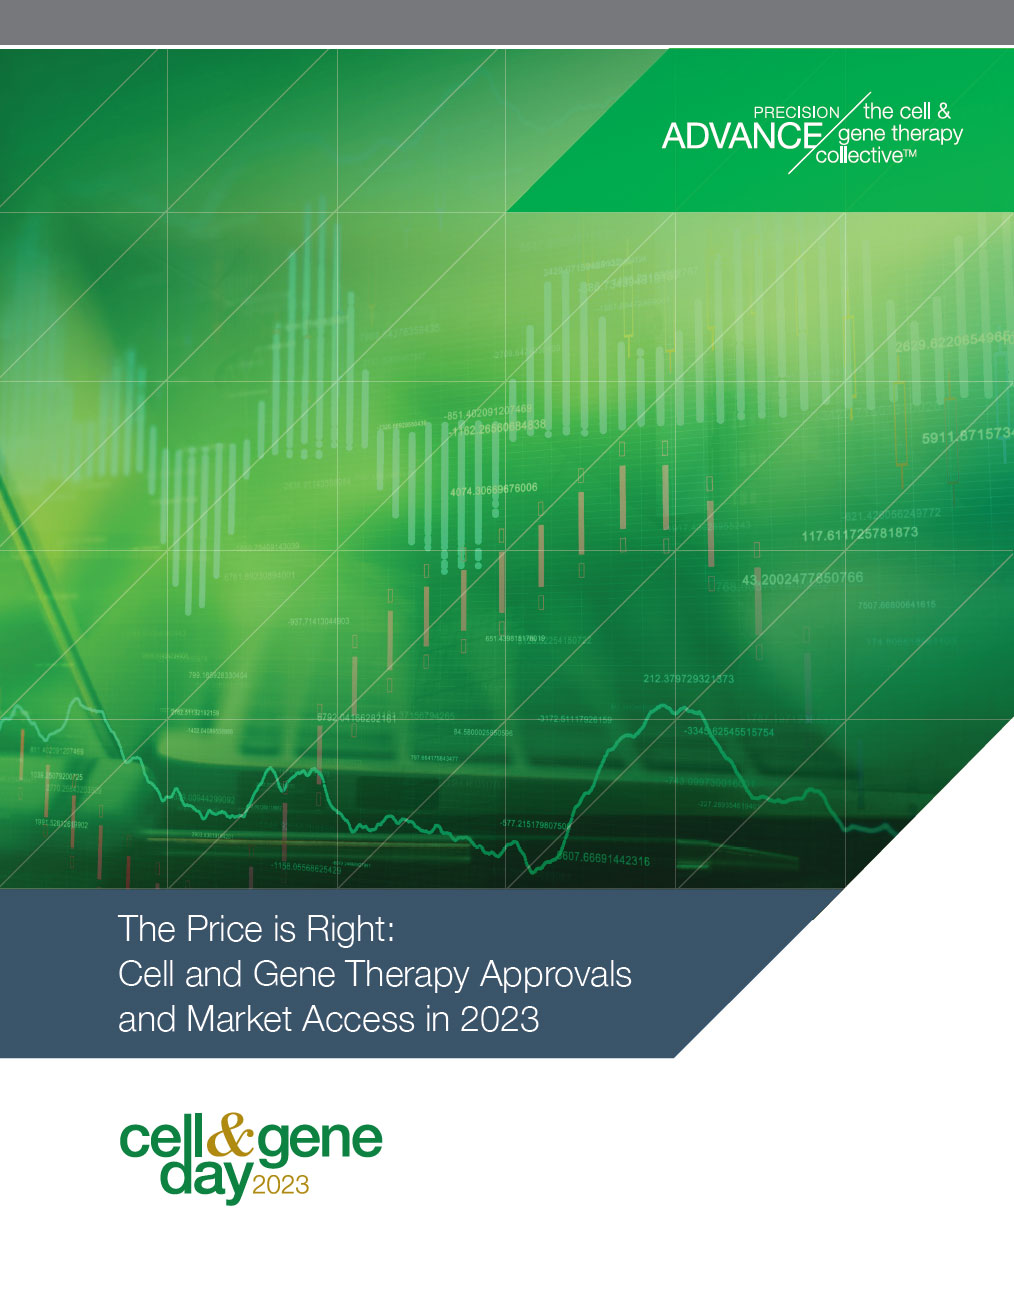 The Price is Right: Cell and Gene Therapy Approvals and Market Access in 2023